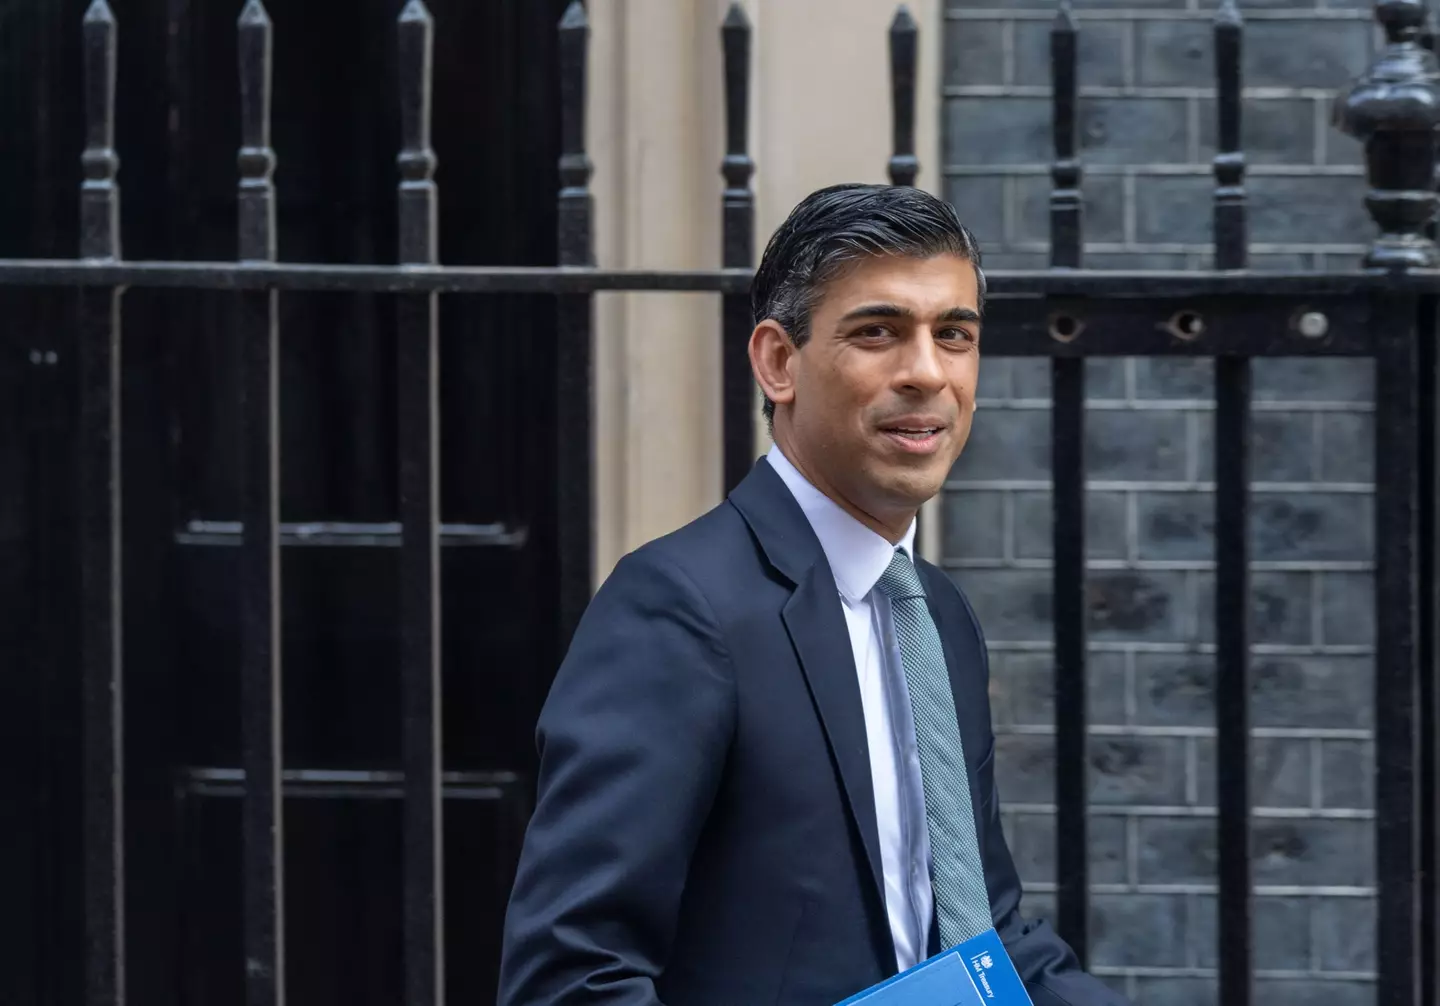 Rishi Sunak is the new prime minister.